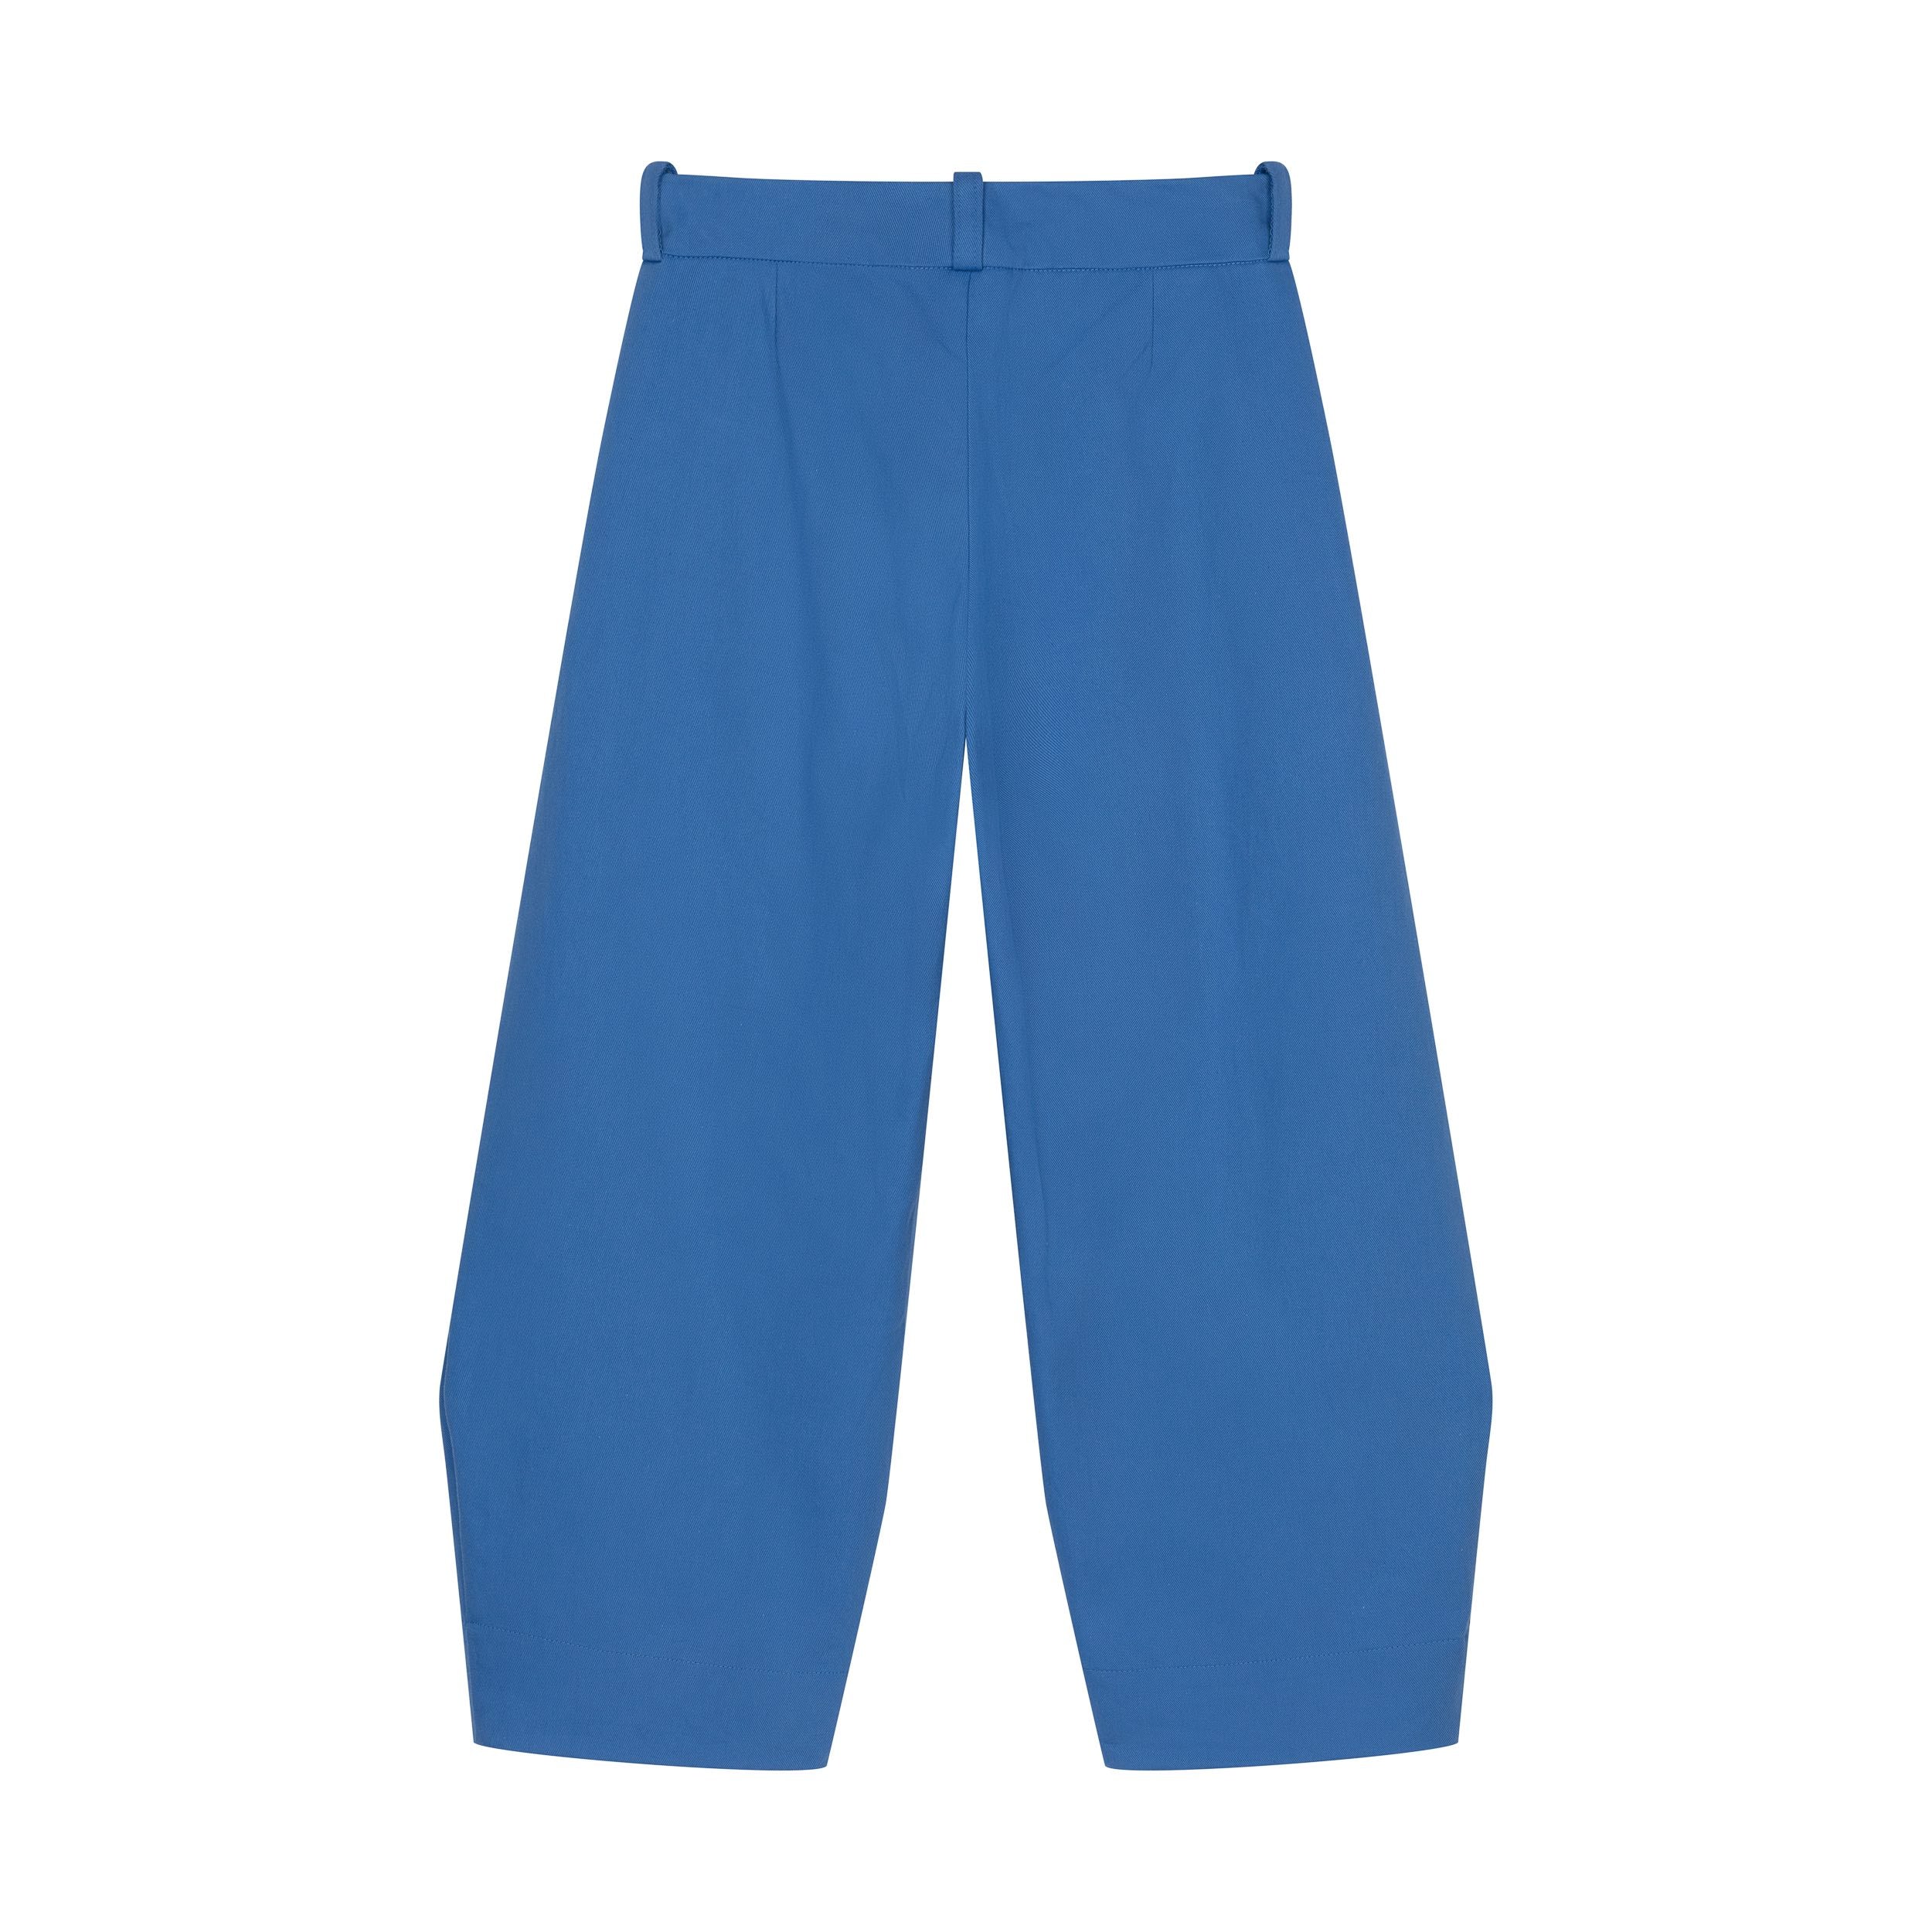 Carrier Company Dutch trouser in Sky Cotton Drill